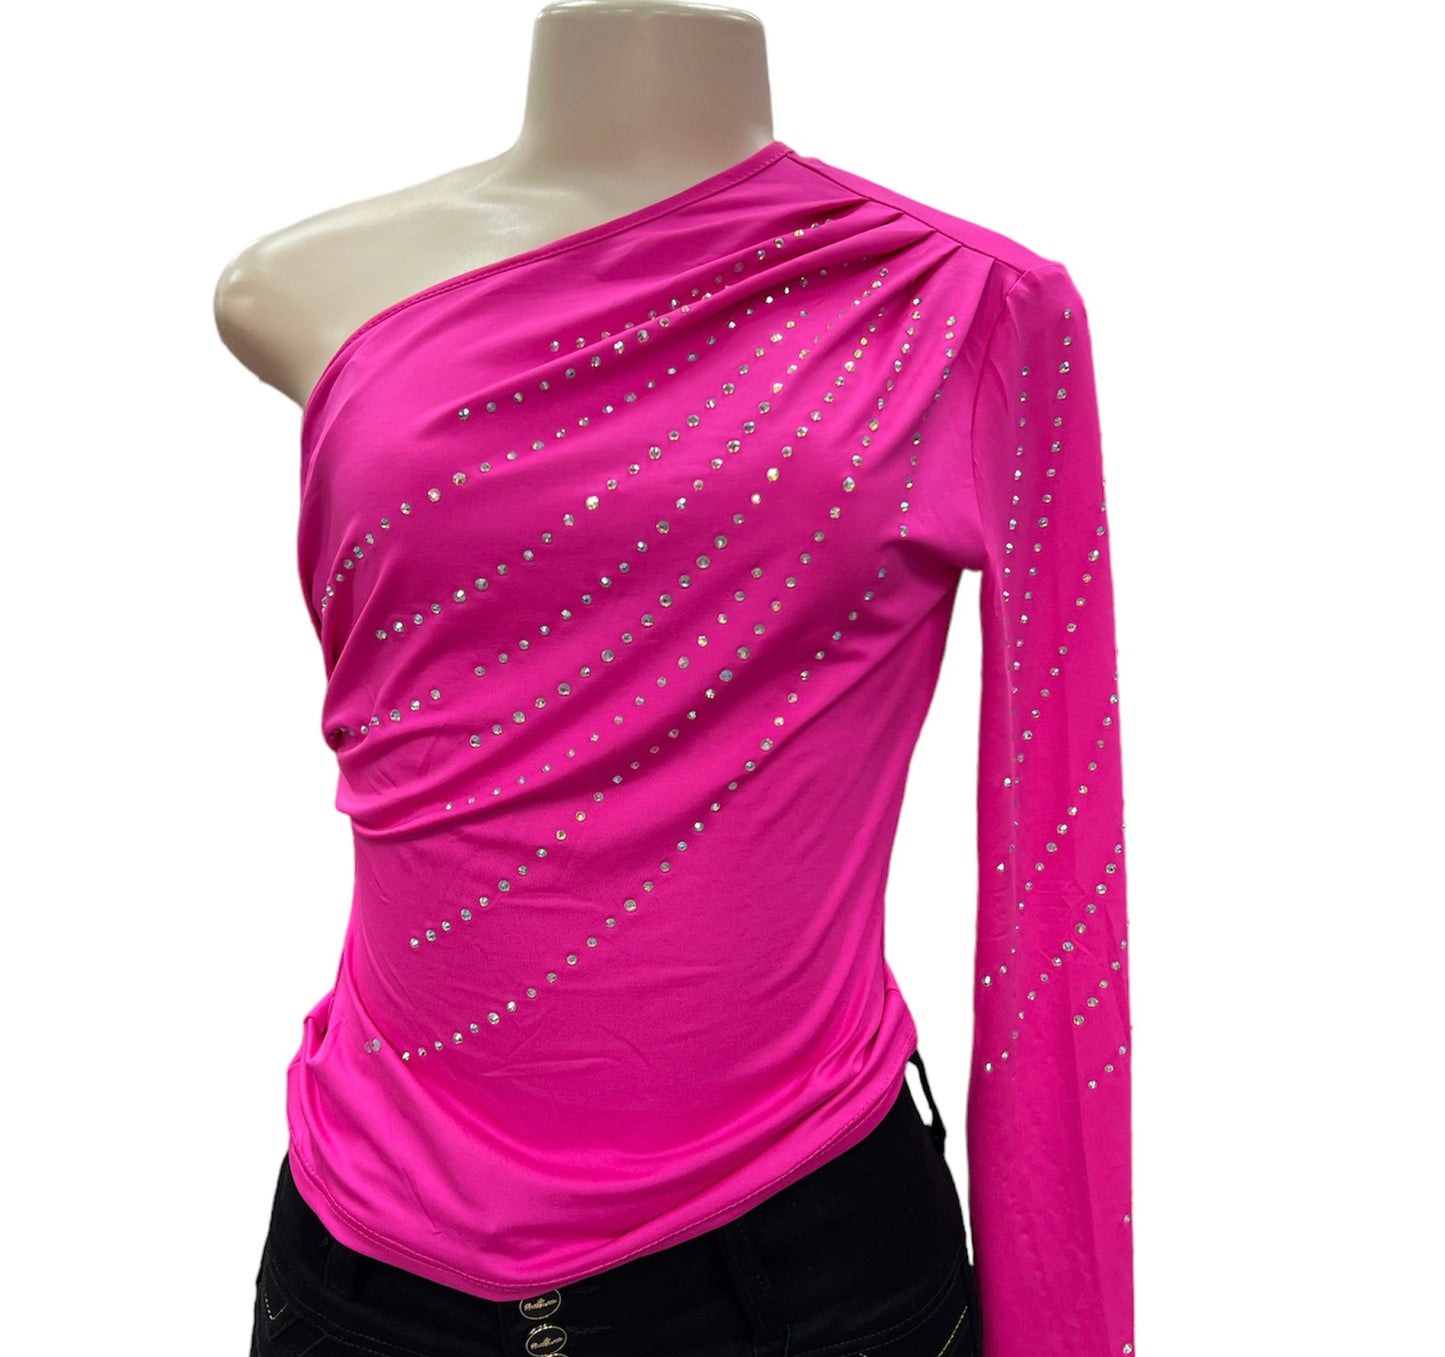 Hot pink one sleeve